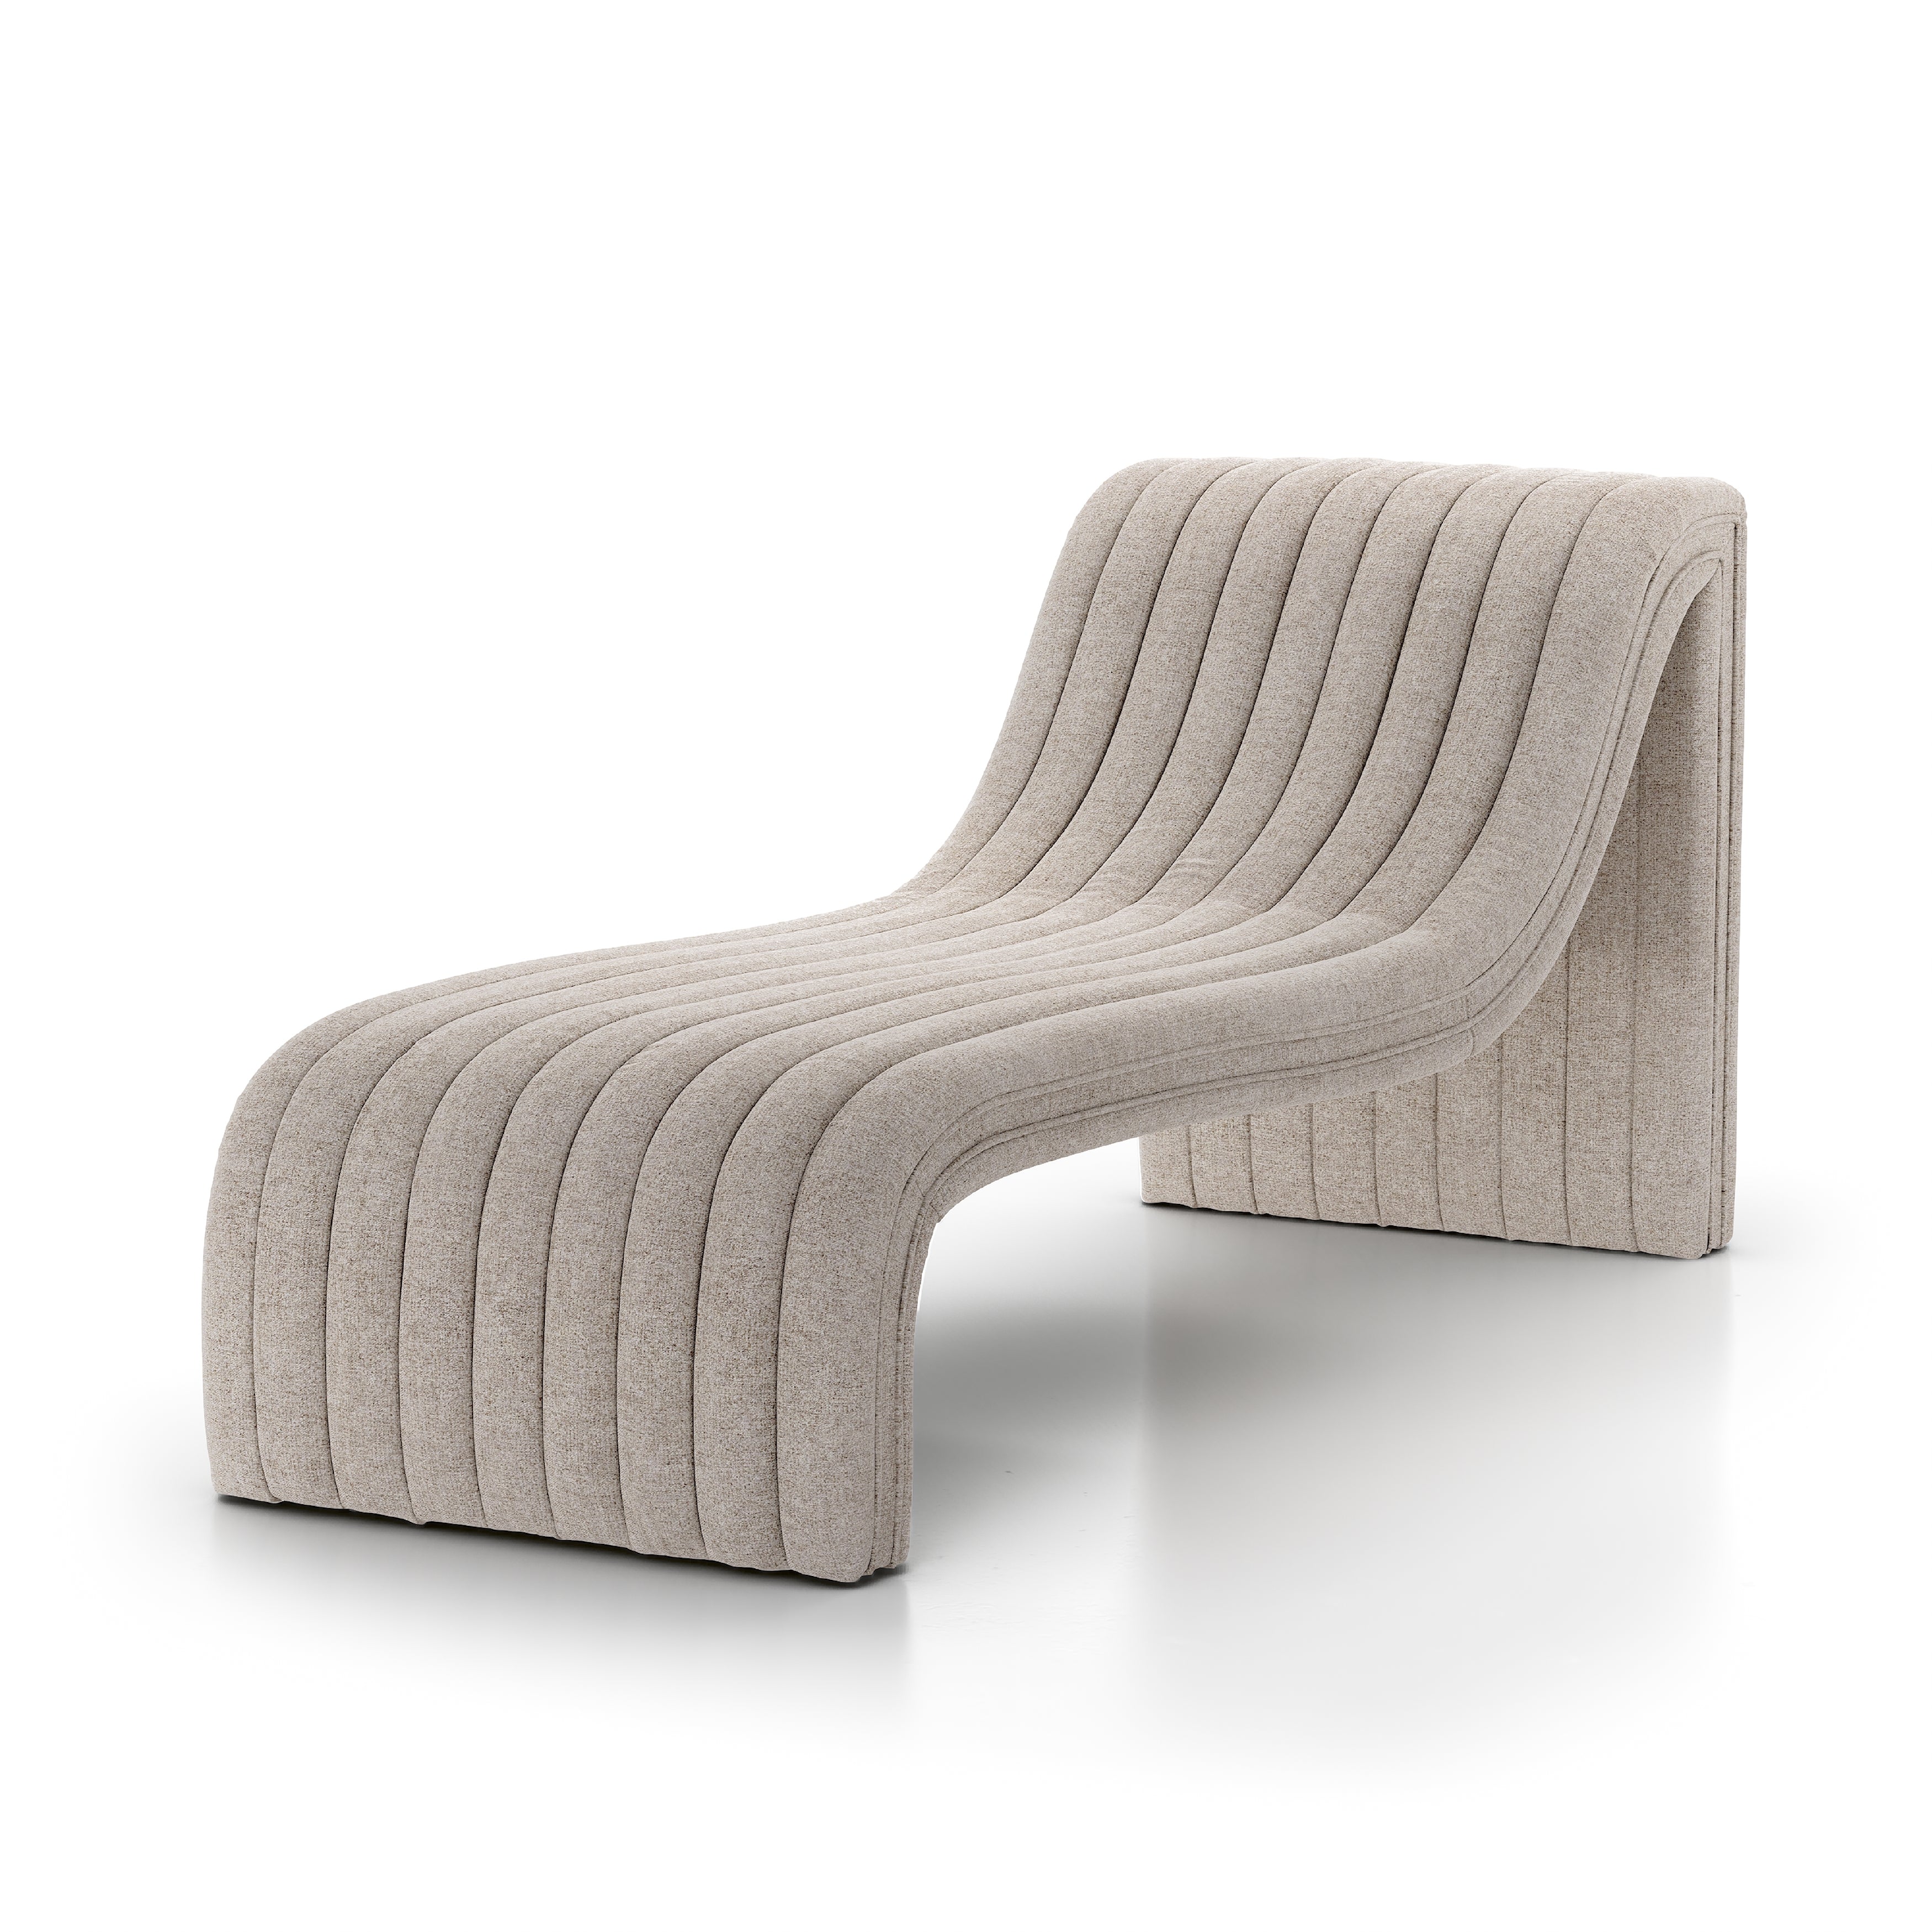 A modern take on classic chaise, textural polyester seating with a subtle herringbone pattern adopts dramatic linear channeling for texture and comfort alike. Amethyst Home provides interior design, new construction, custom furniture, and area rugs in the Nashville metro area.